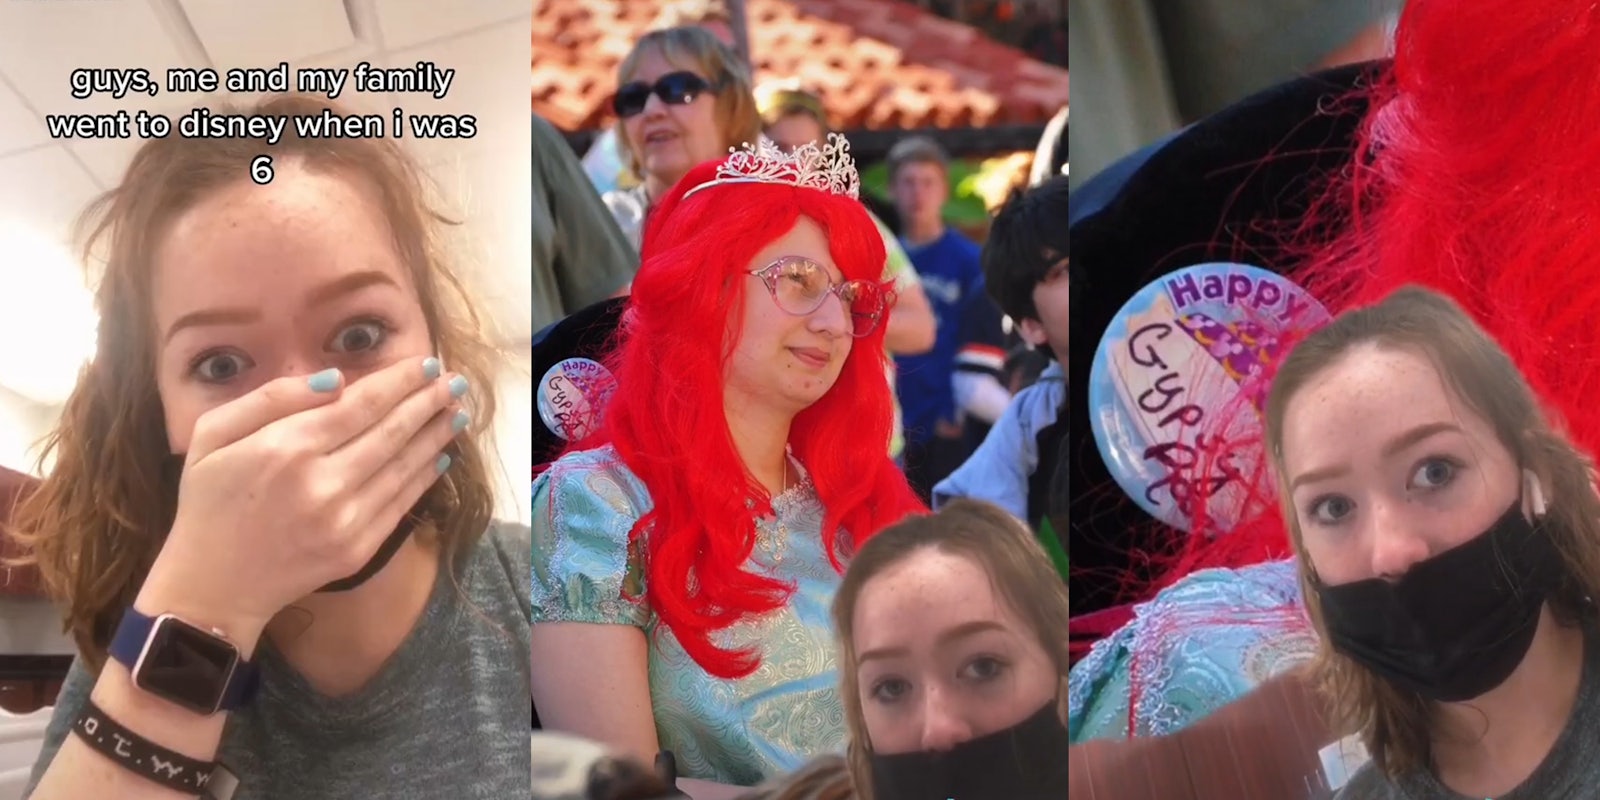 young woman with hand over mouth, surprised with caption 'guys, me and my family went to disney when i was 6' (l) a young girl dressed as Ariel from The Little Mermaid (r) a button showing 'Happy' and 'Gypsy Rose' (r)